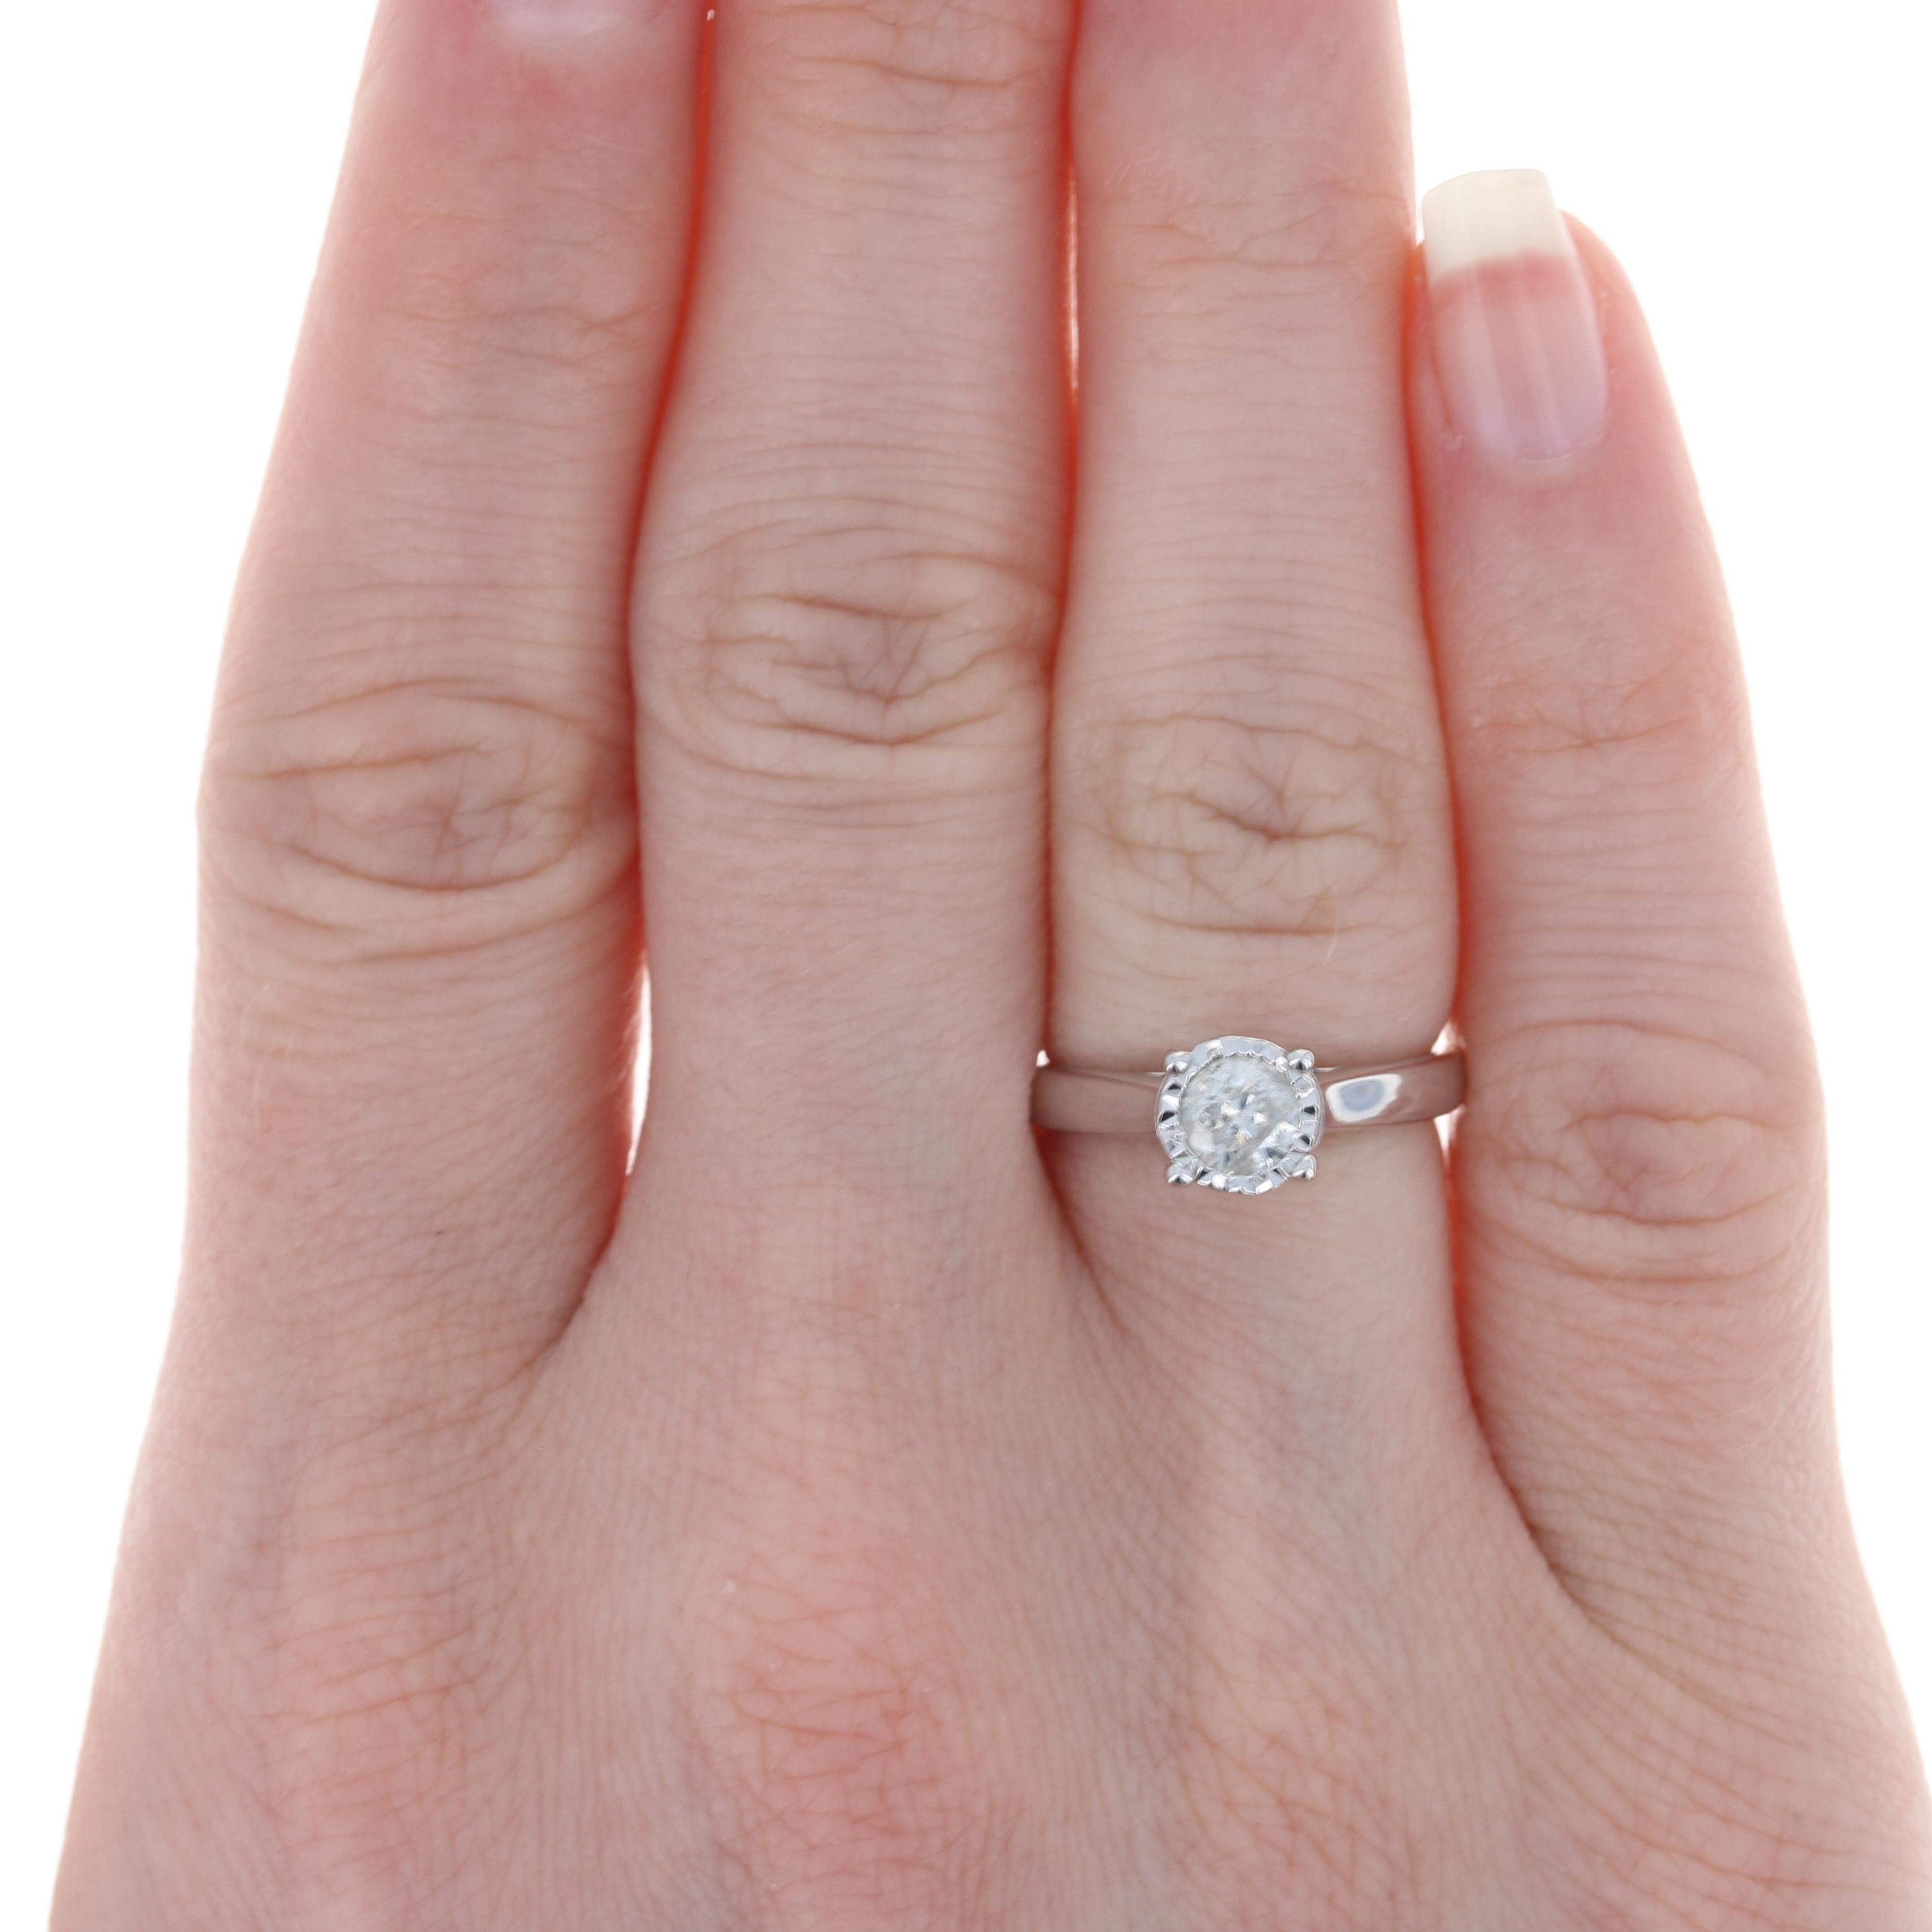 Size: 4 3/4
 Sizing Fee: Up 2 sizes for $25 or down 1 size for $20
 
 Metal Content: 14k White Gold 
 
 Stone Information: 
 Natural Diamond
 Carat: .50ct
 Cut: Round Brilliant 
 Color: I 
 Clarity: I2
 
 Style: Solitaire
 Features: Cathedral Mount